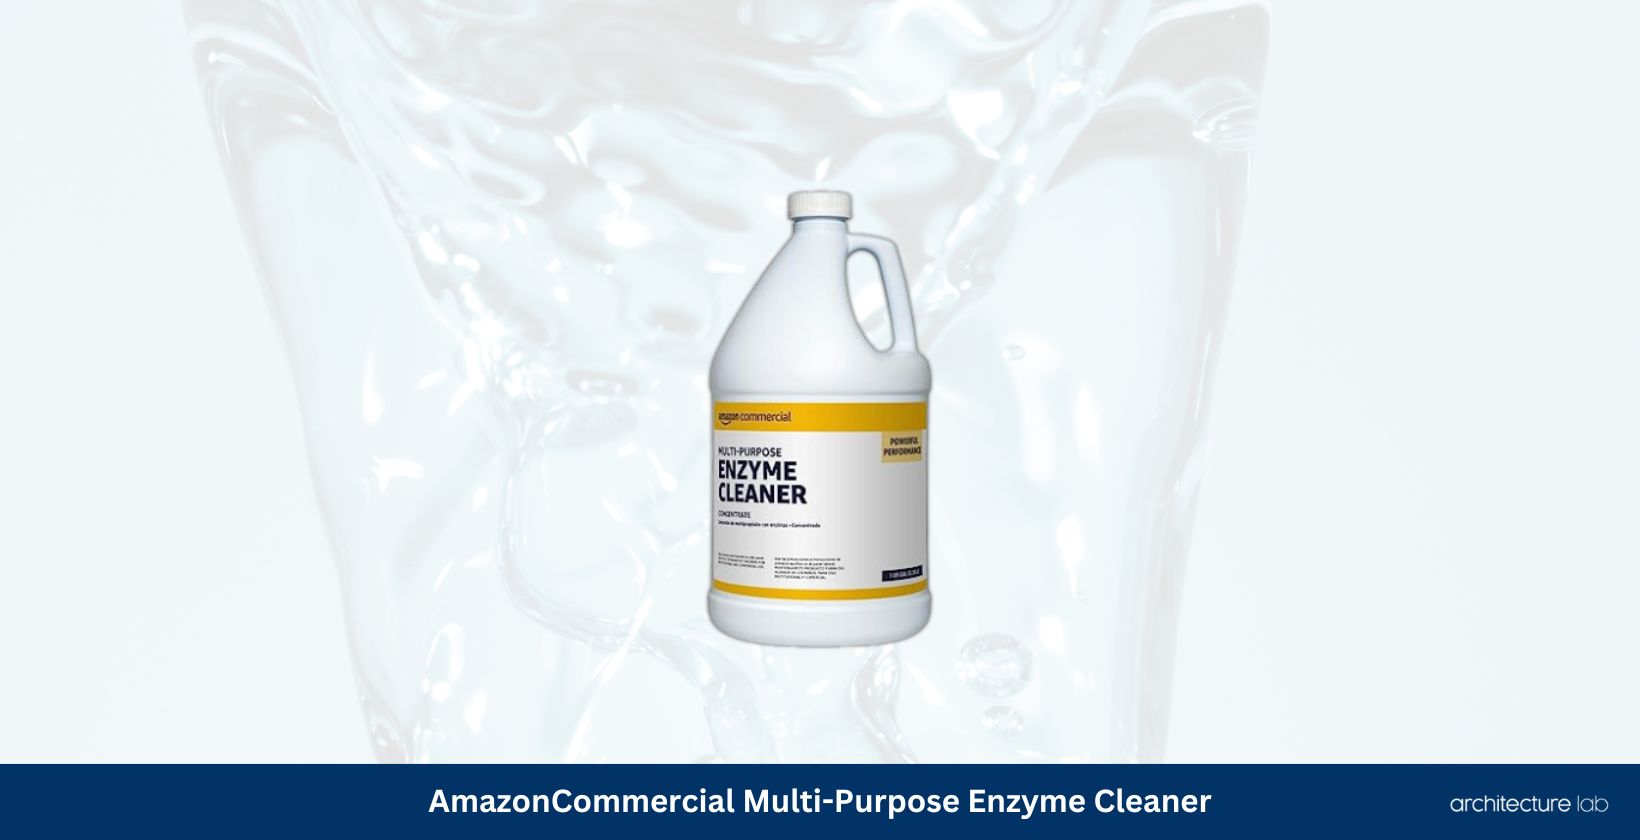 Amazoncommercial multi purpose enzyme cleaner